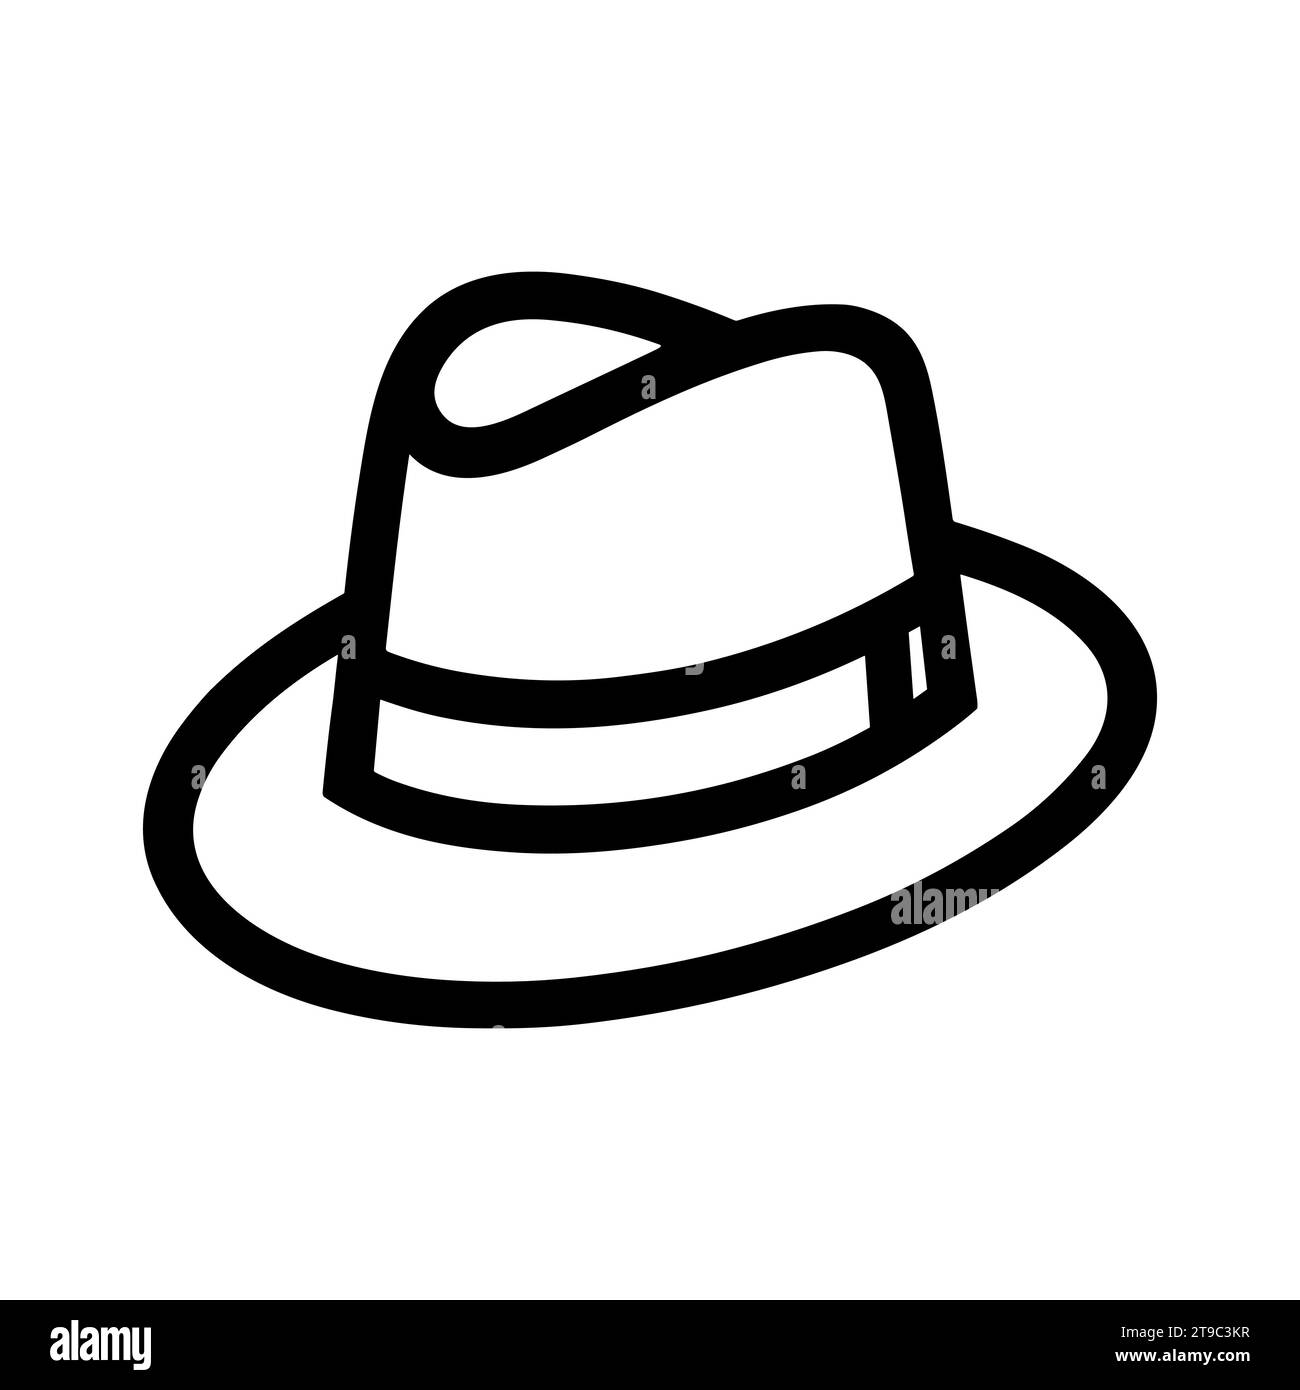 Fedora hat icon. Fedora hat black linear icon on white background. Vector illustration Stock Vector